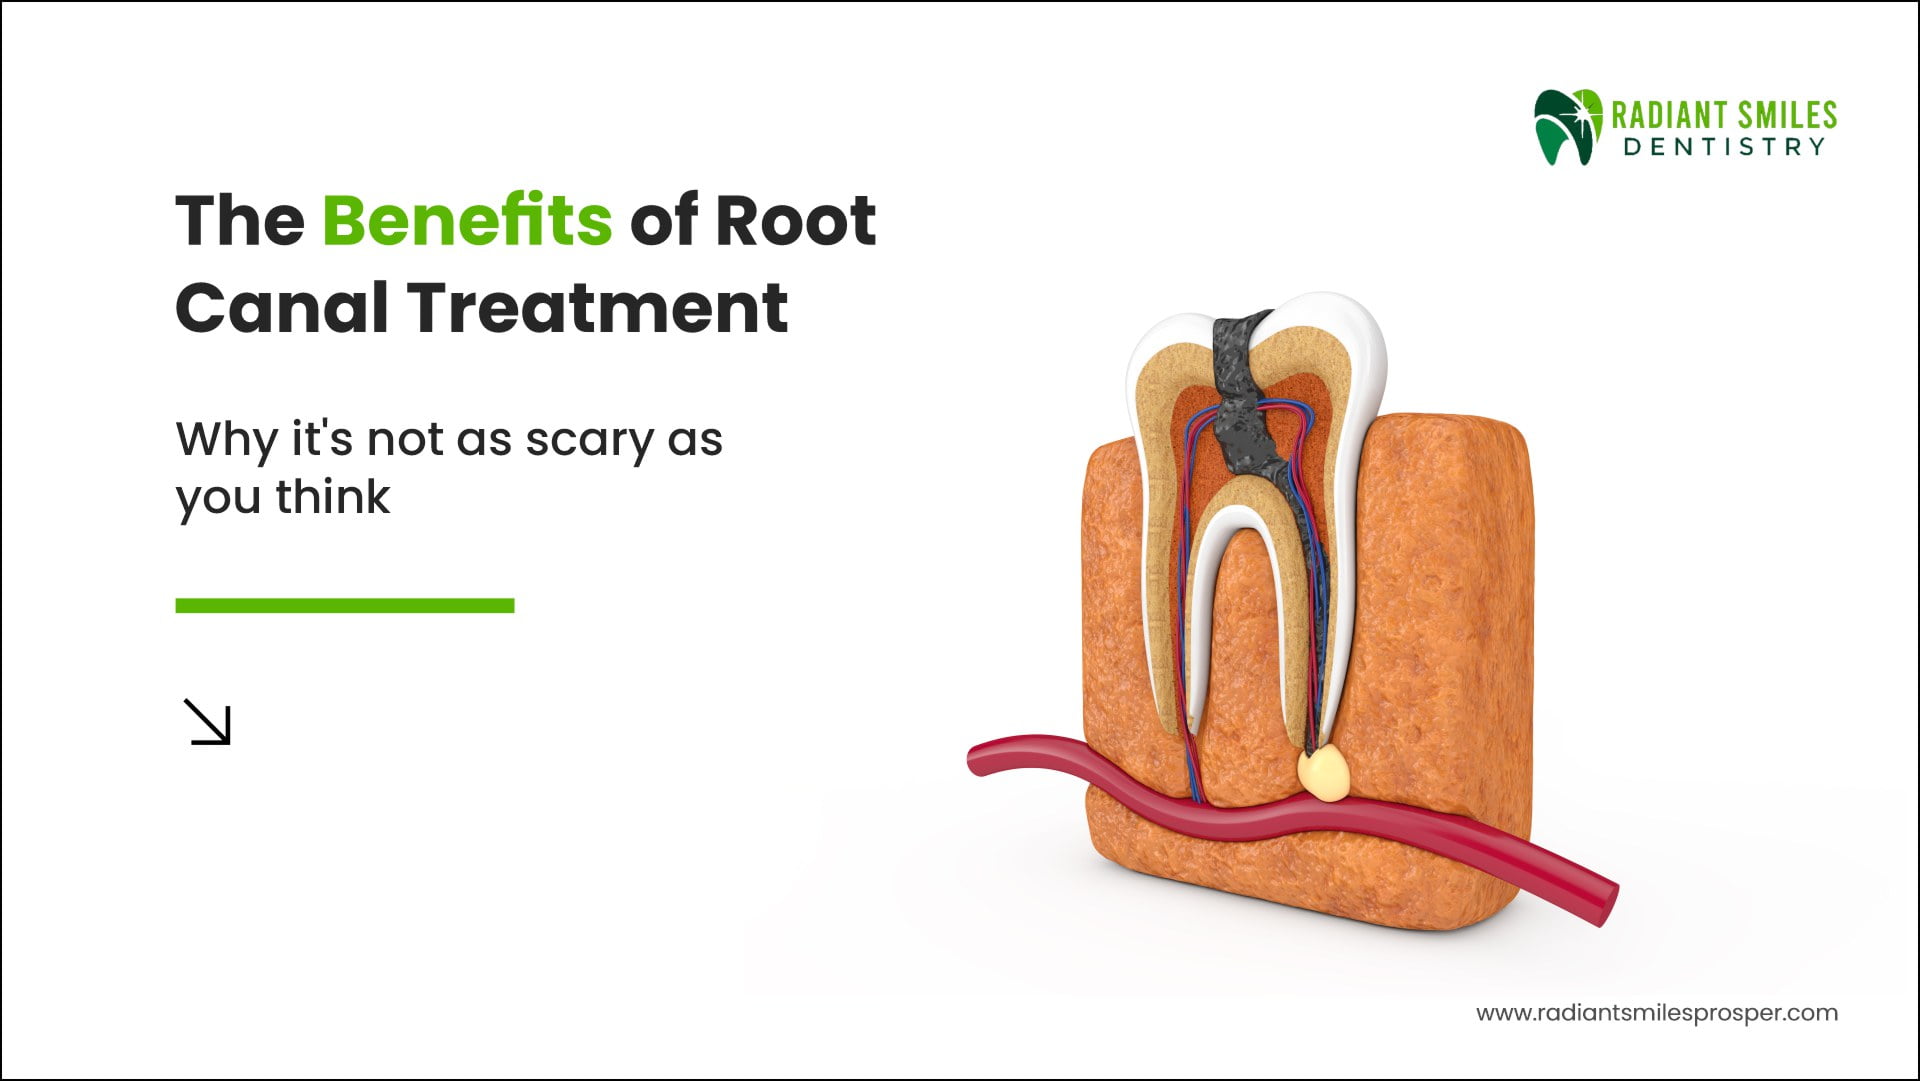 The Benefits of Root Canal Treatment